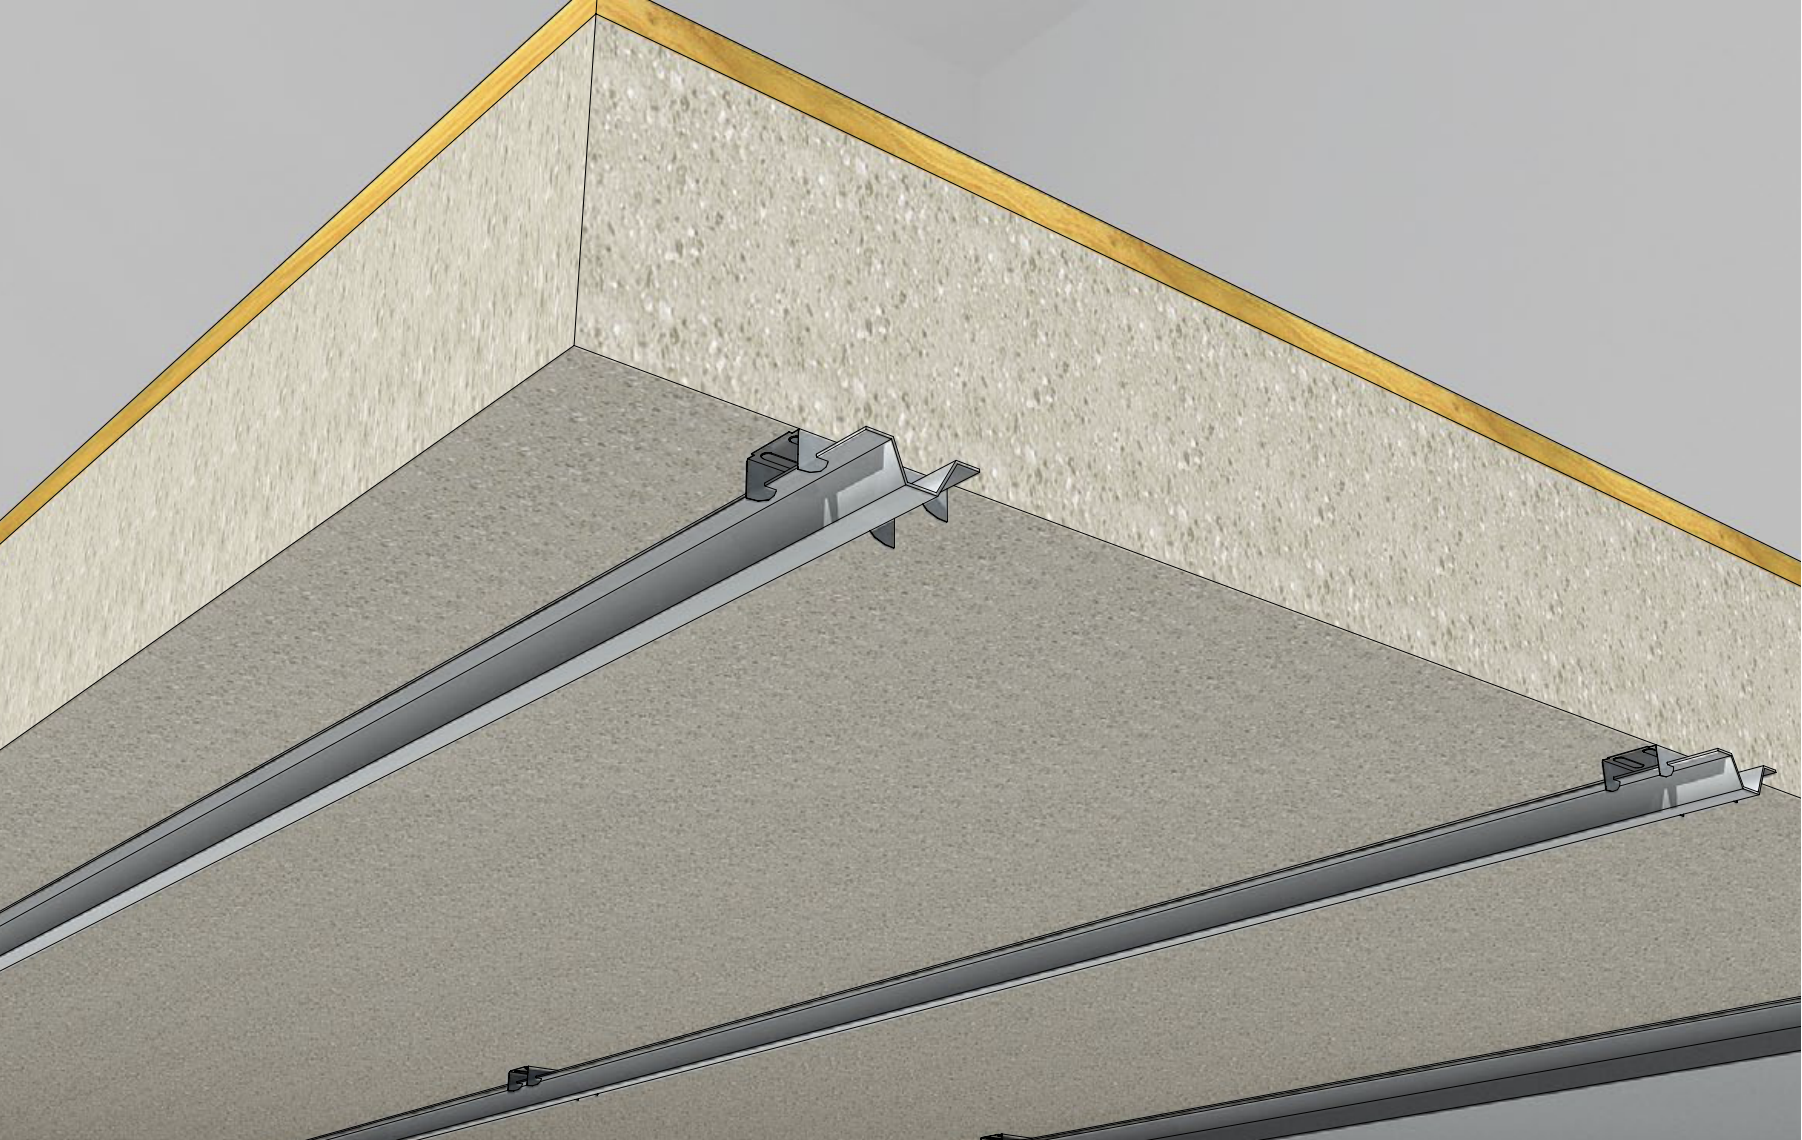 A ceiling with a metal track and some yellow lines